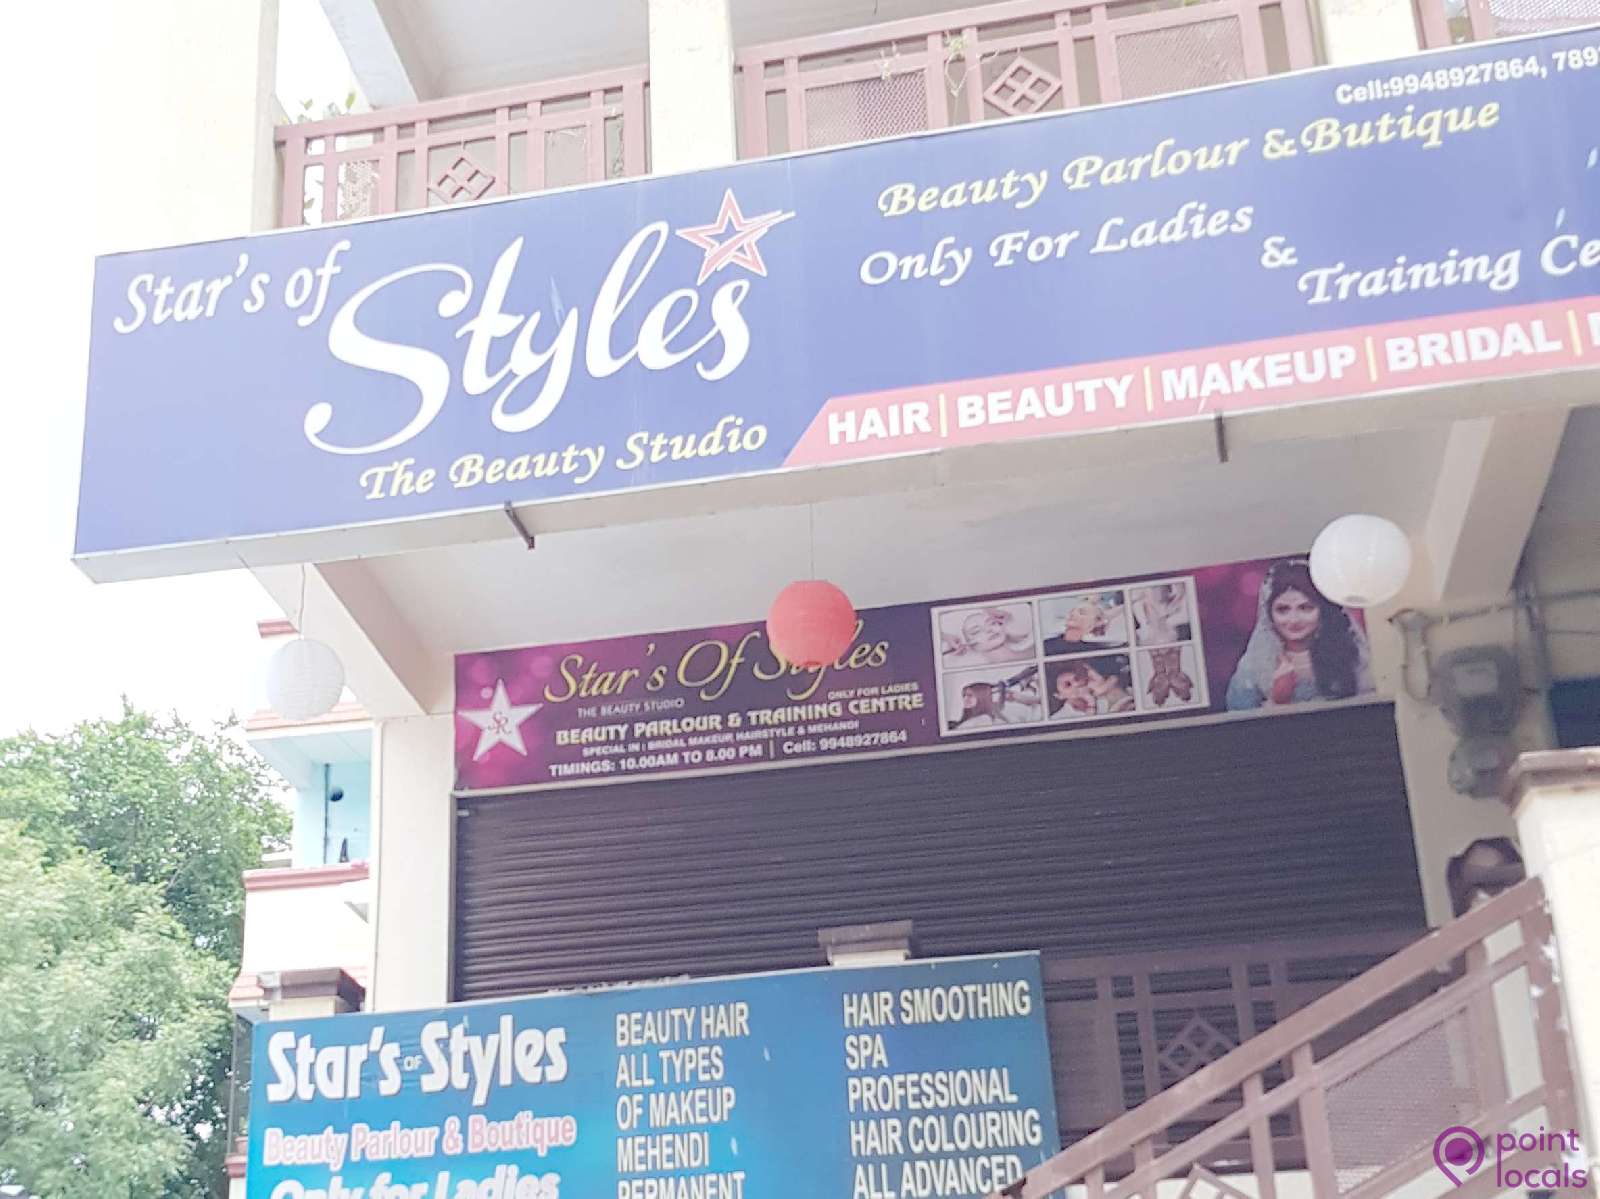 Star's of Styles The Beauty Studio - Beauty Salon in Secunderabad,Telangana  | Pointlocals